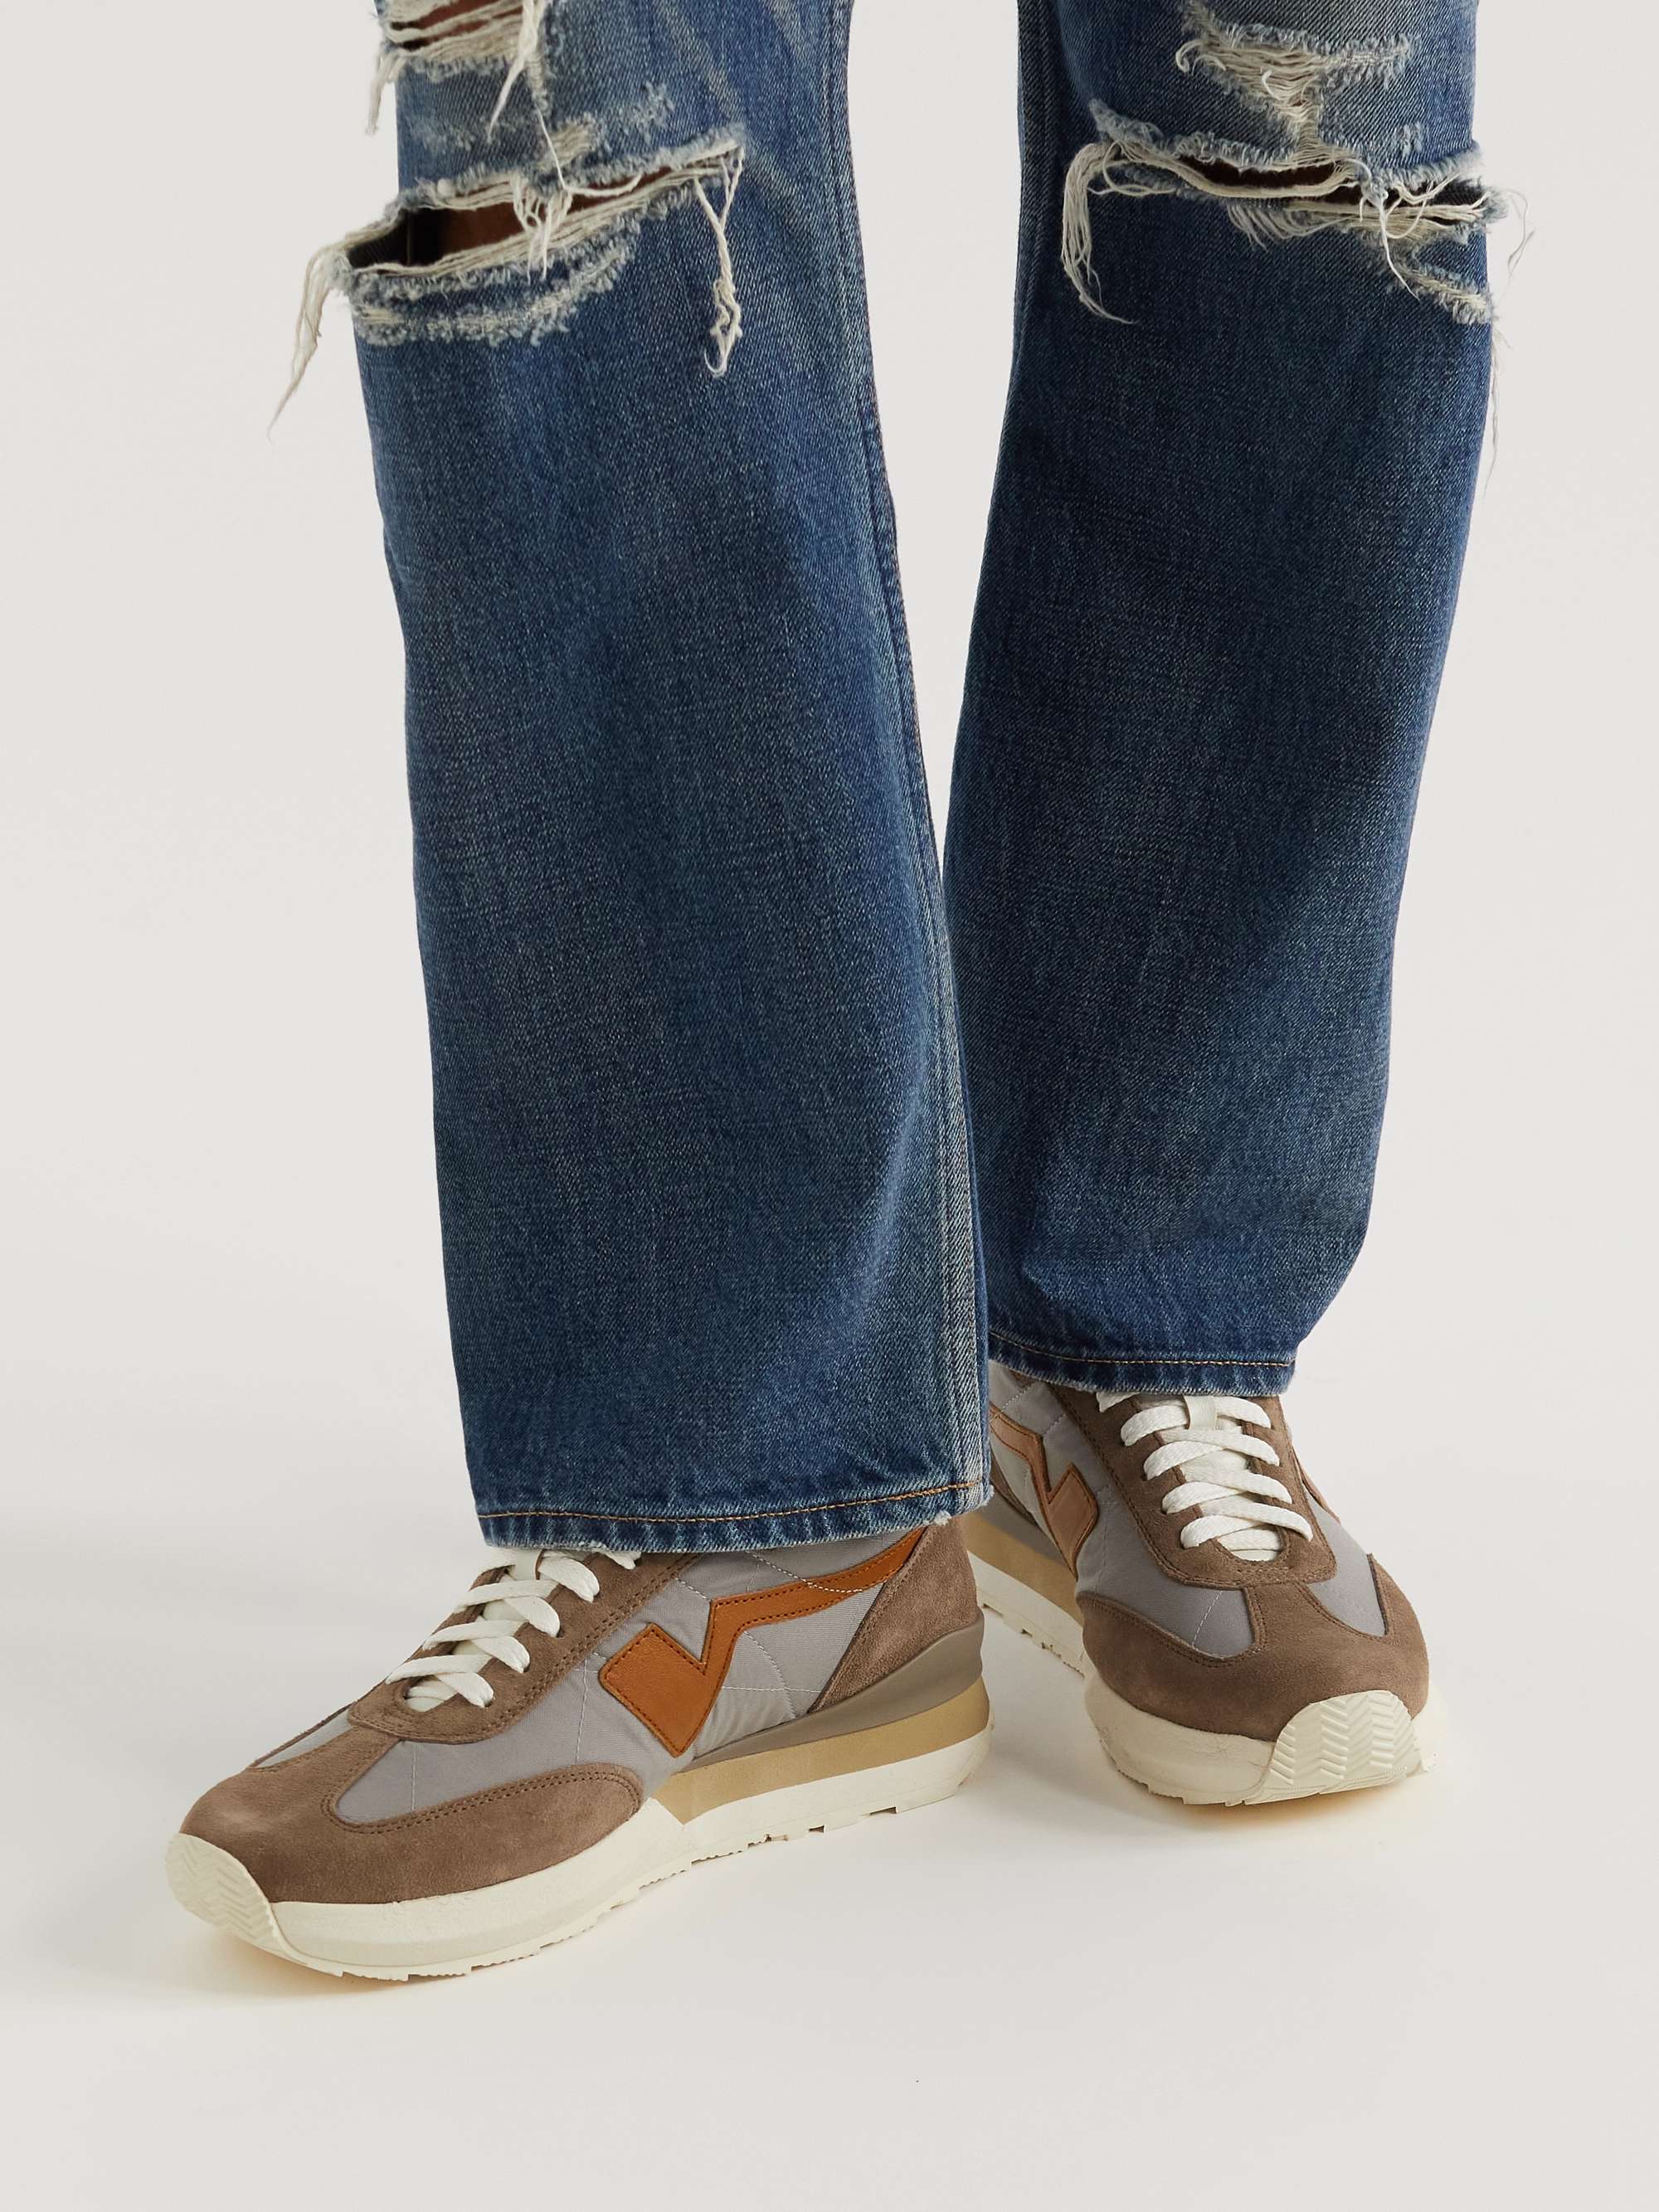 VISVIM FKT Runner Suede- and Leather-Trimmed Nylon-Blend Sneakers